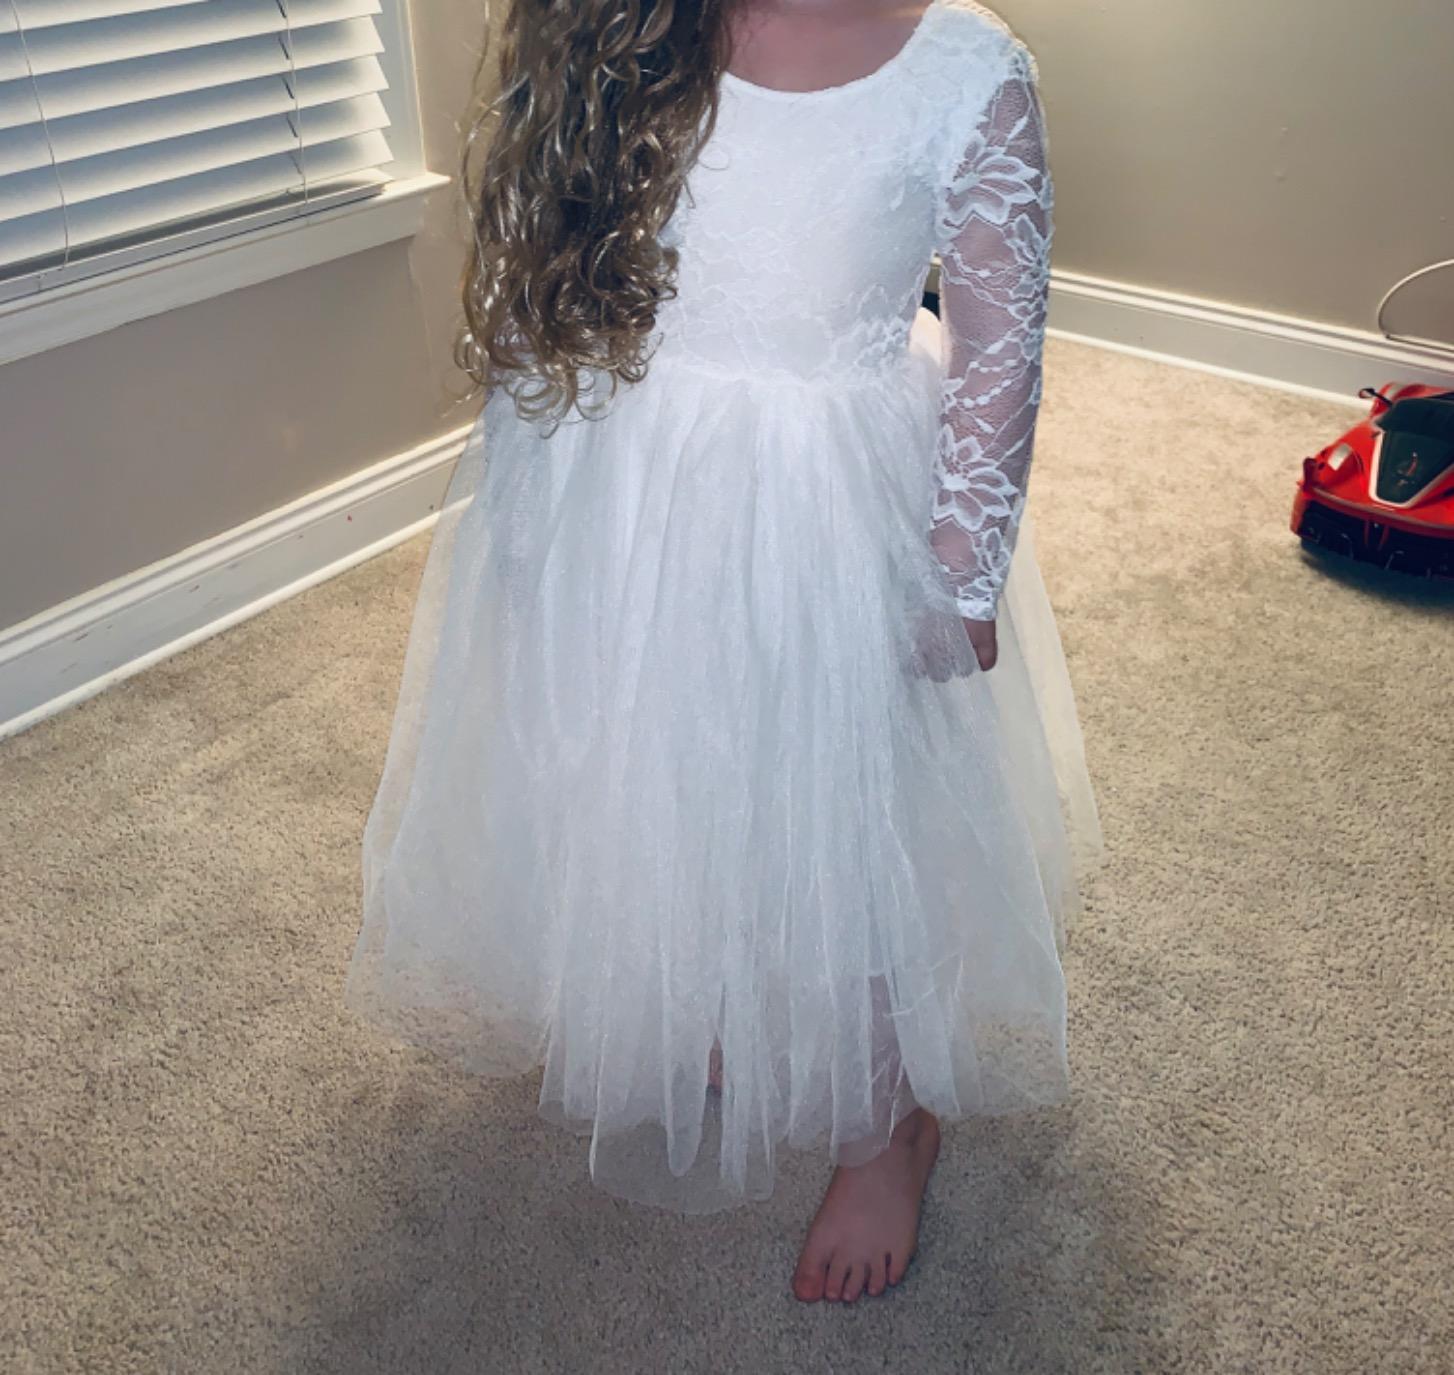 2Bunnies Flower Girl Dress Rose Lace Back A-Line Long Sleeve Straight Tulle Knee (White) - 2BUNNIES